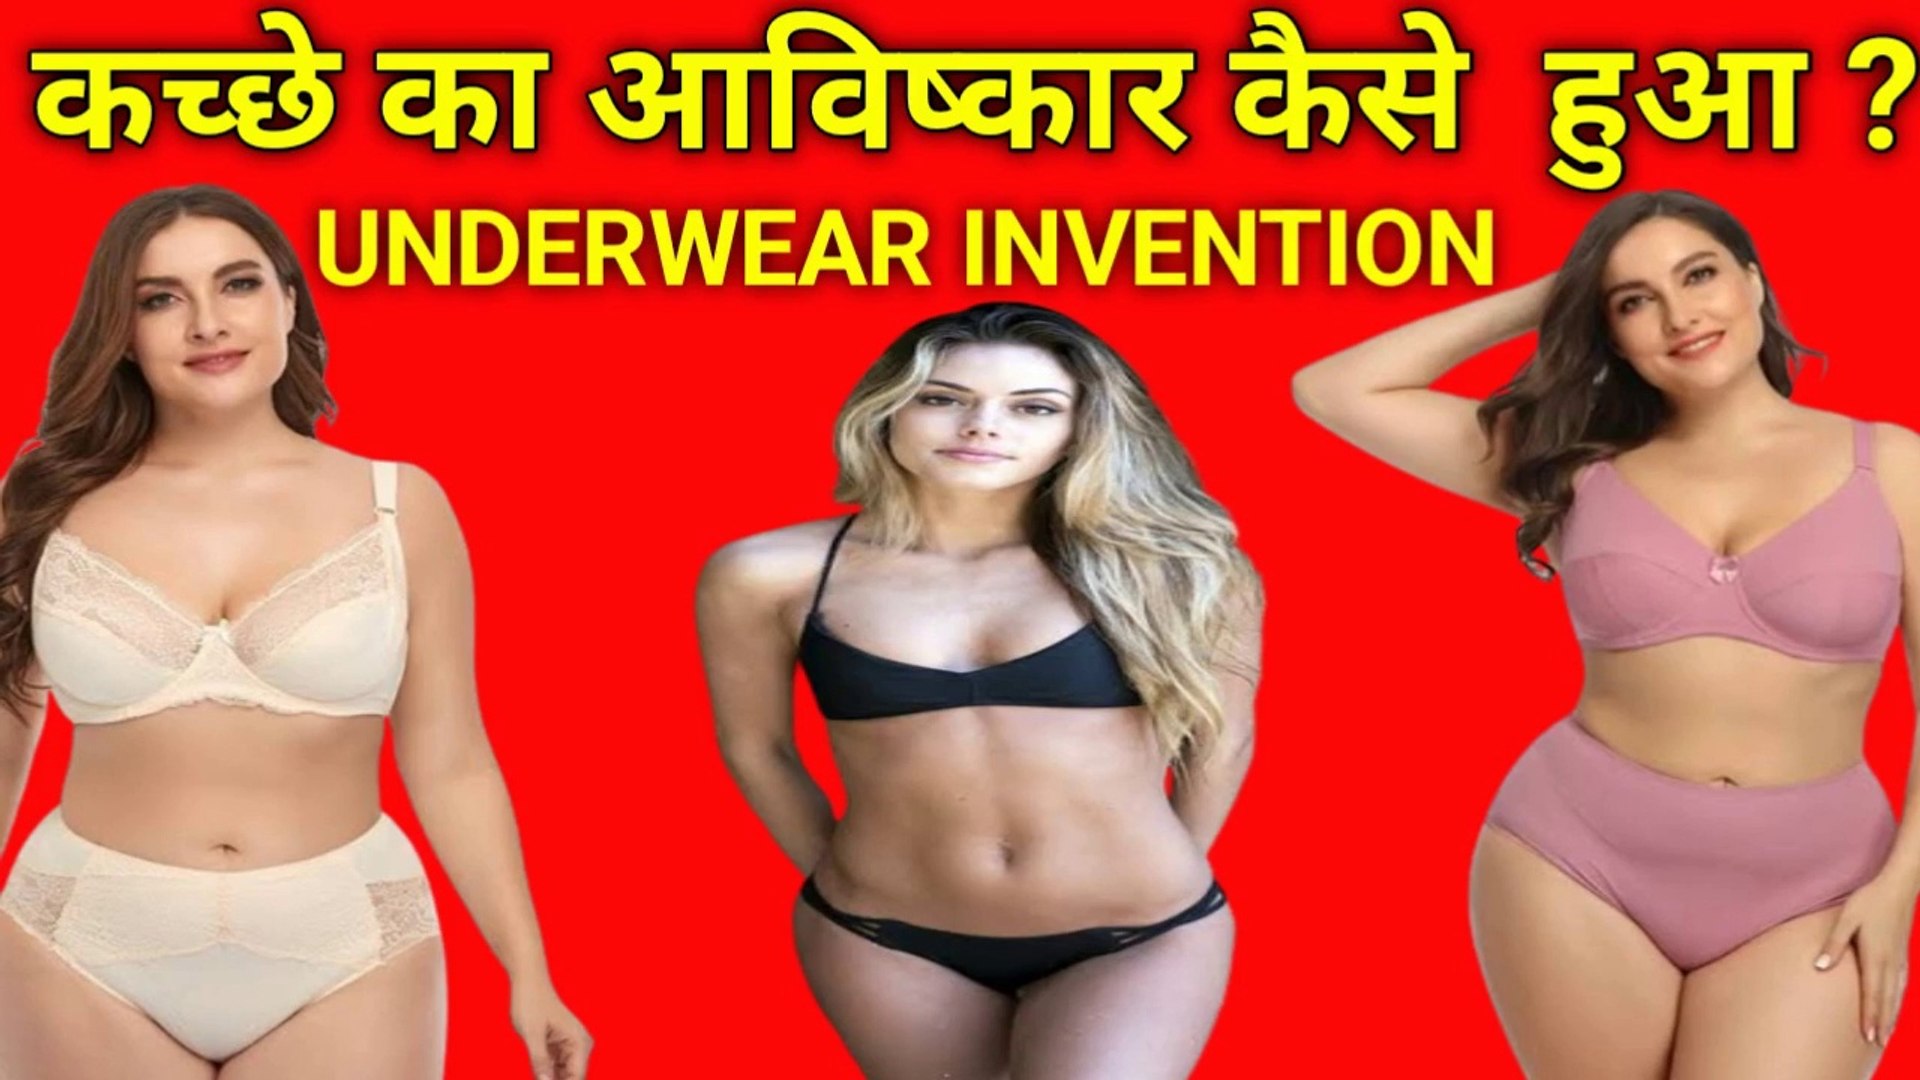 कच्छे का अविष्कार -HOW PANTY AND UNDERWEAR INVENTED - video Dailymotion